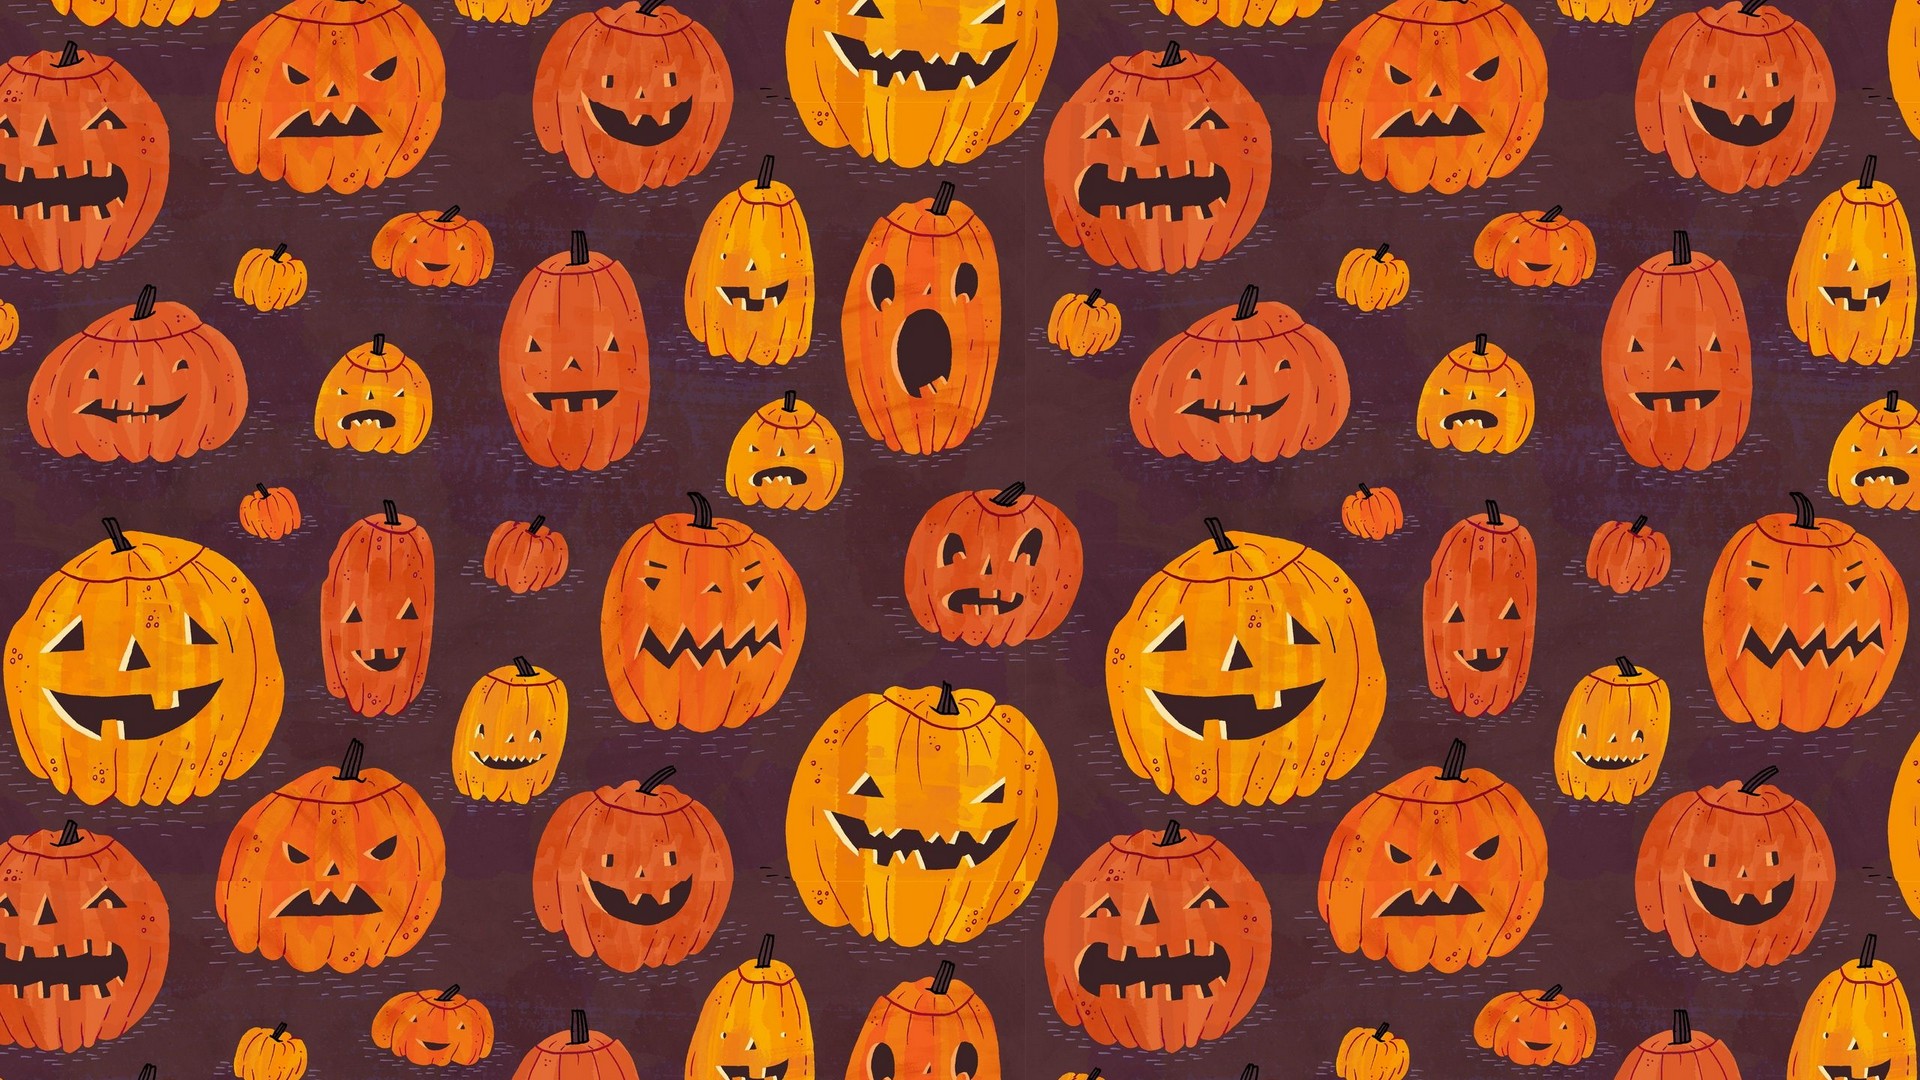 Wallpaper HD Cute Halloween With high-resolution 1920X1080 pixel. You can use this wallpaper for your Desktop Computer Backgrounds, Mac Wallpapers, Android Lock screen or iPhone Screensavers and another smartphone device